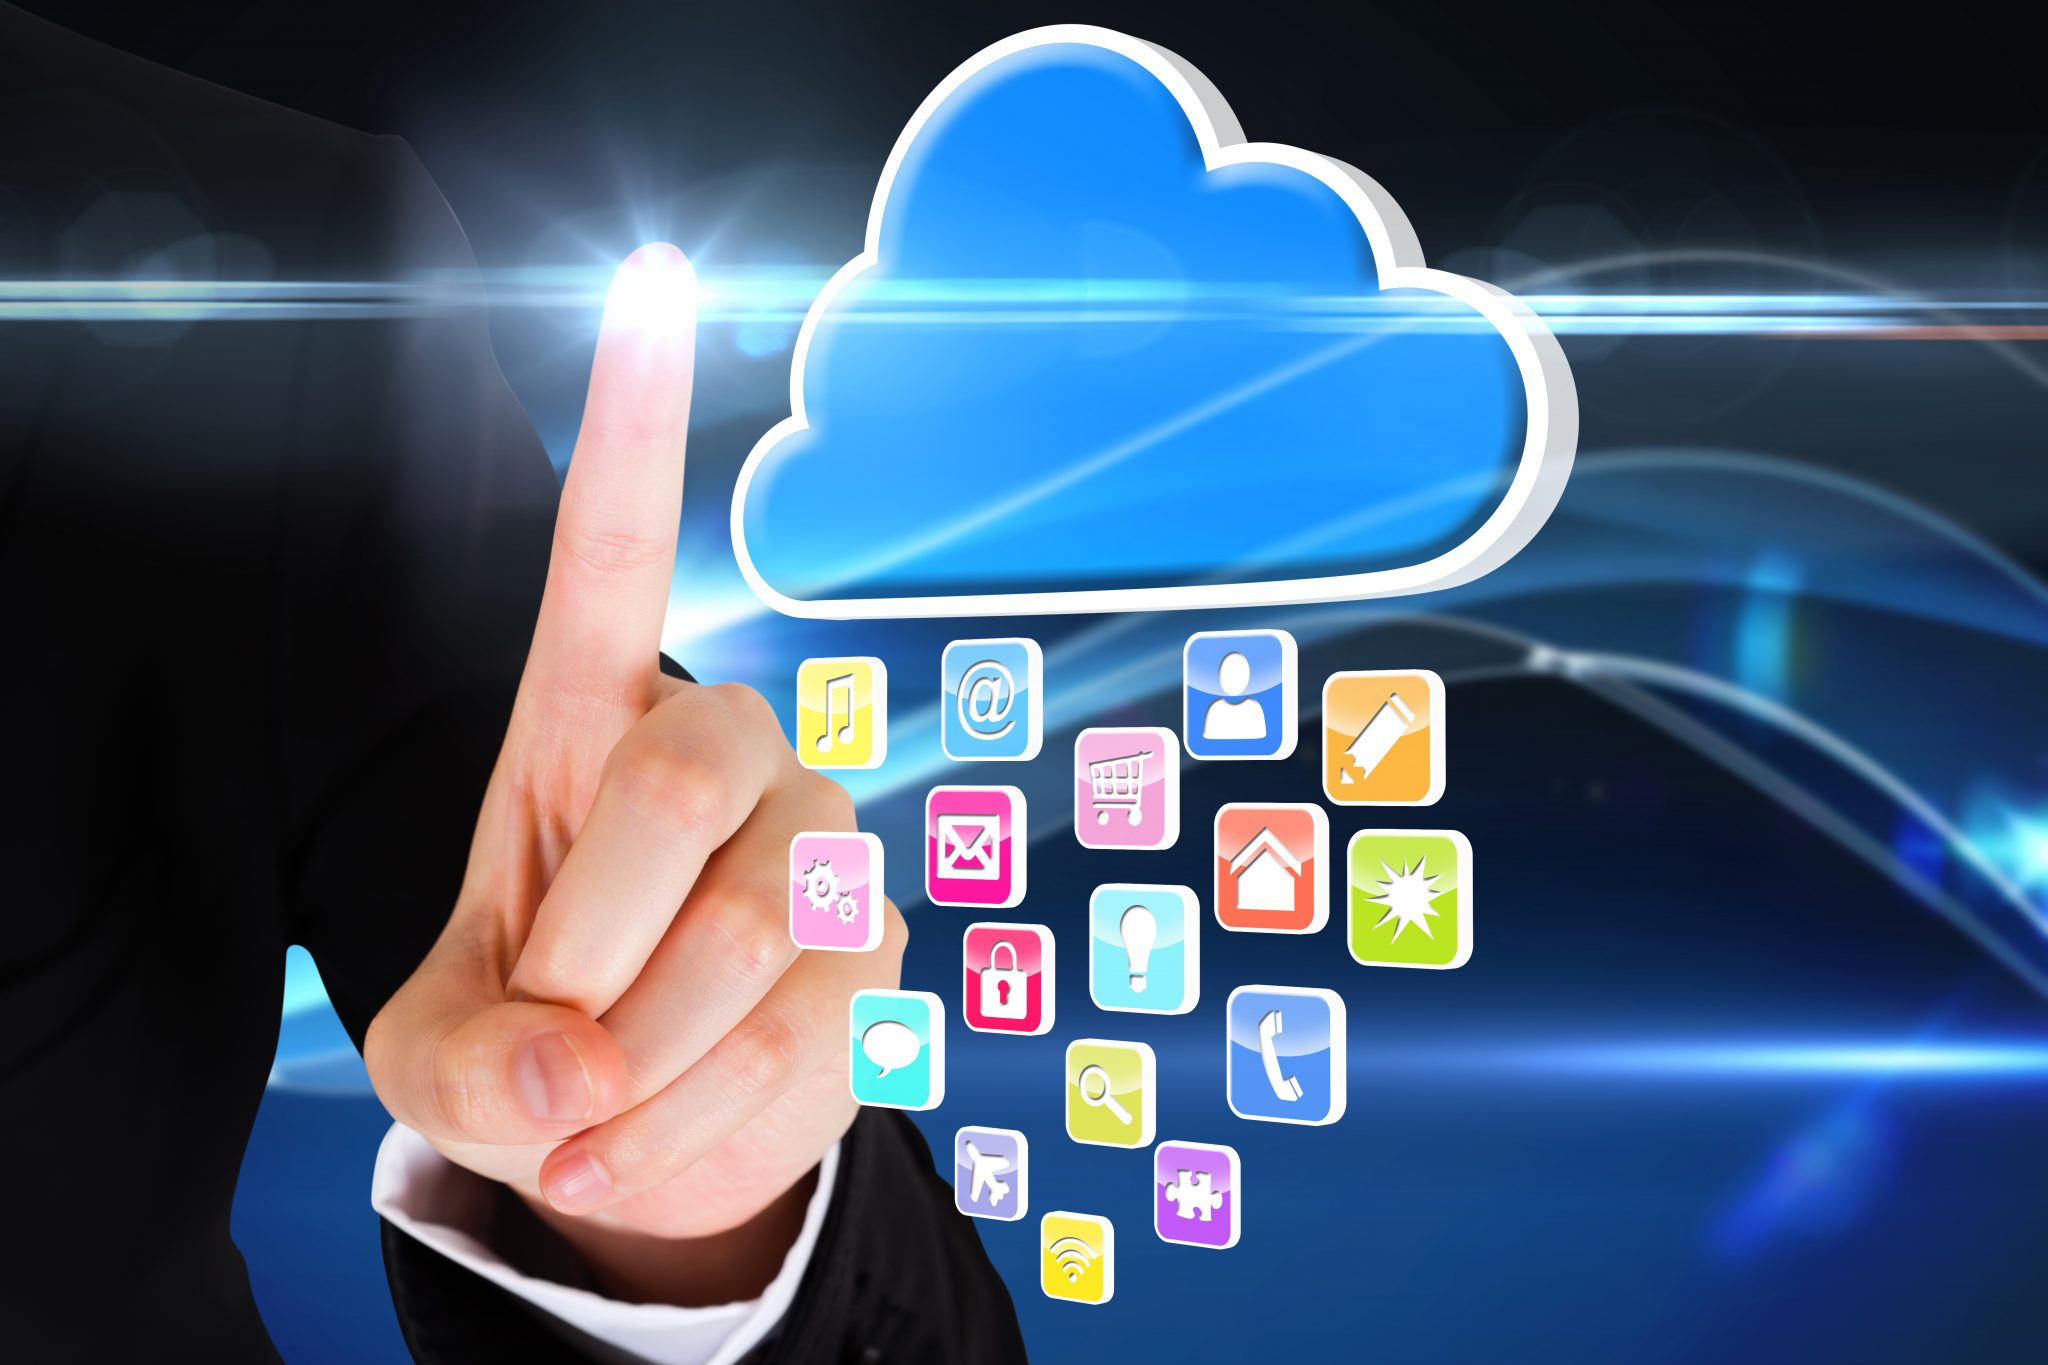 Cloud Development Services Offer To Work Safely And Securely